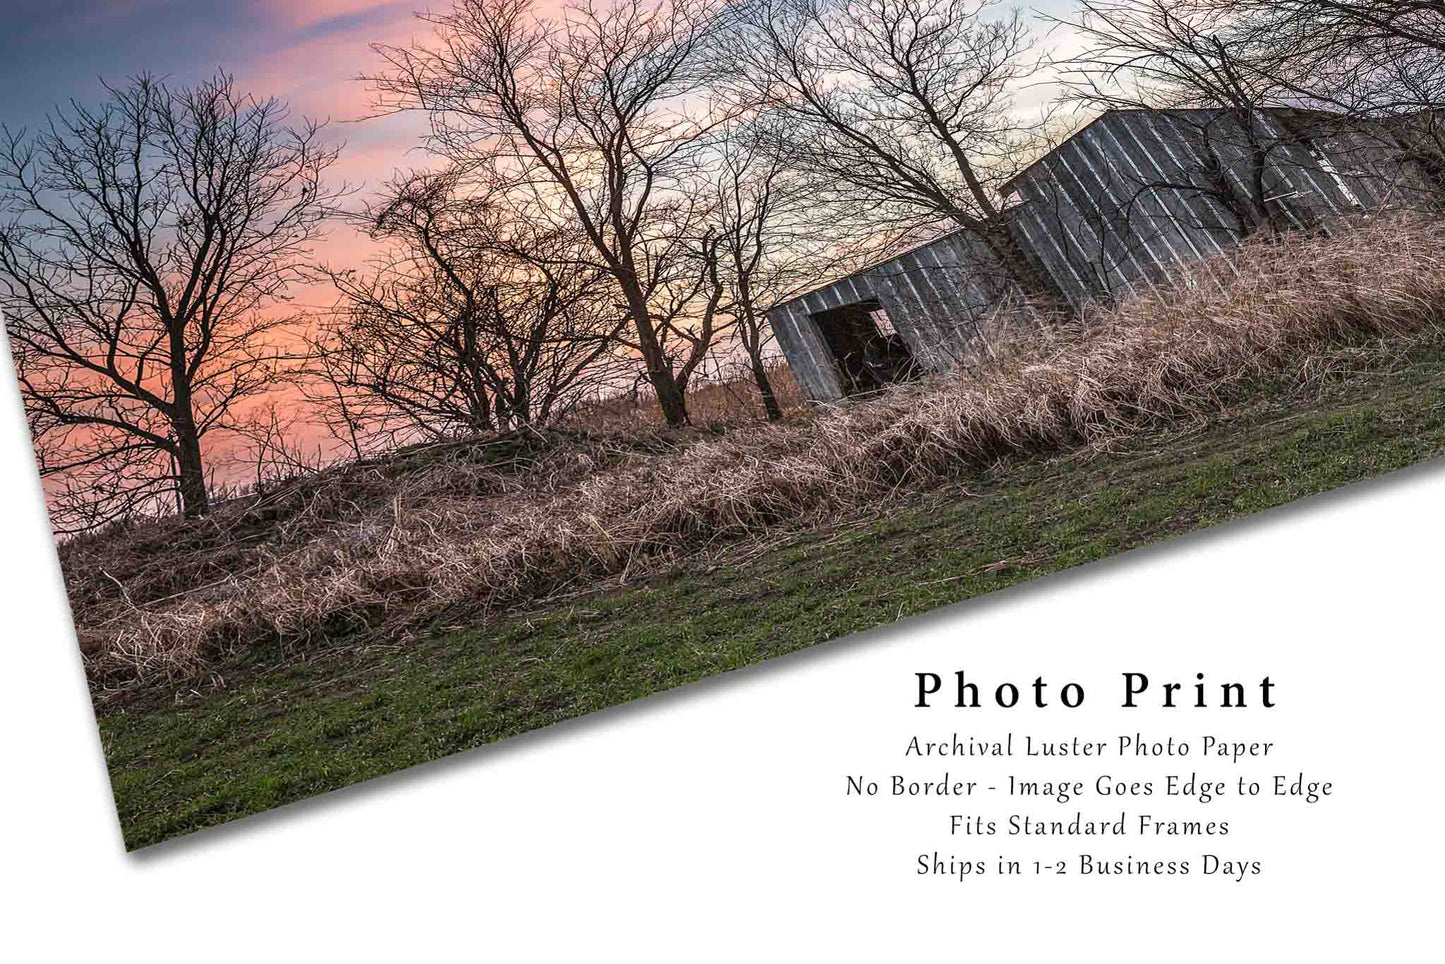 Barn Photography Print - Picture of Weathered Shed Hidden In Trees at Sunset in Flint Hills Kansas Rustic Home Decor Fine Art